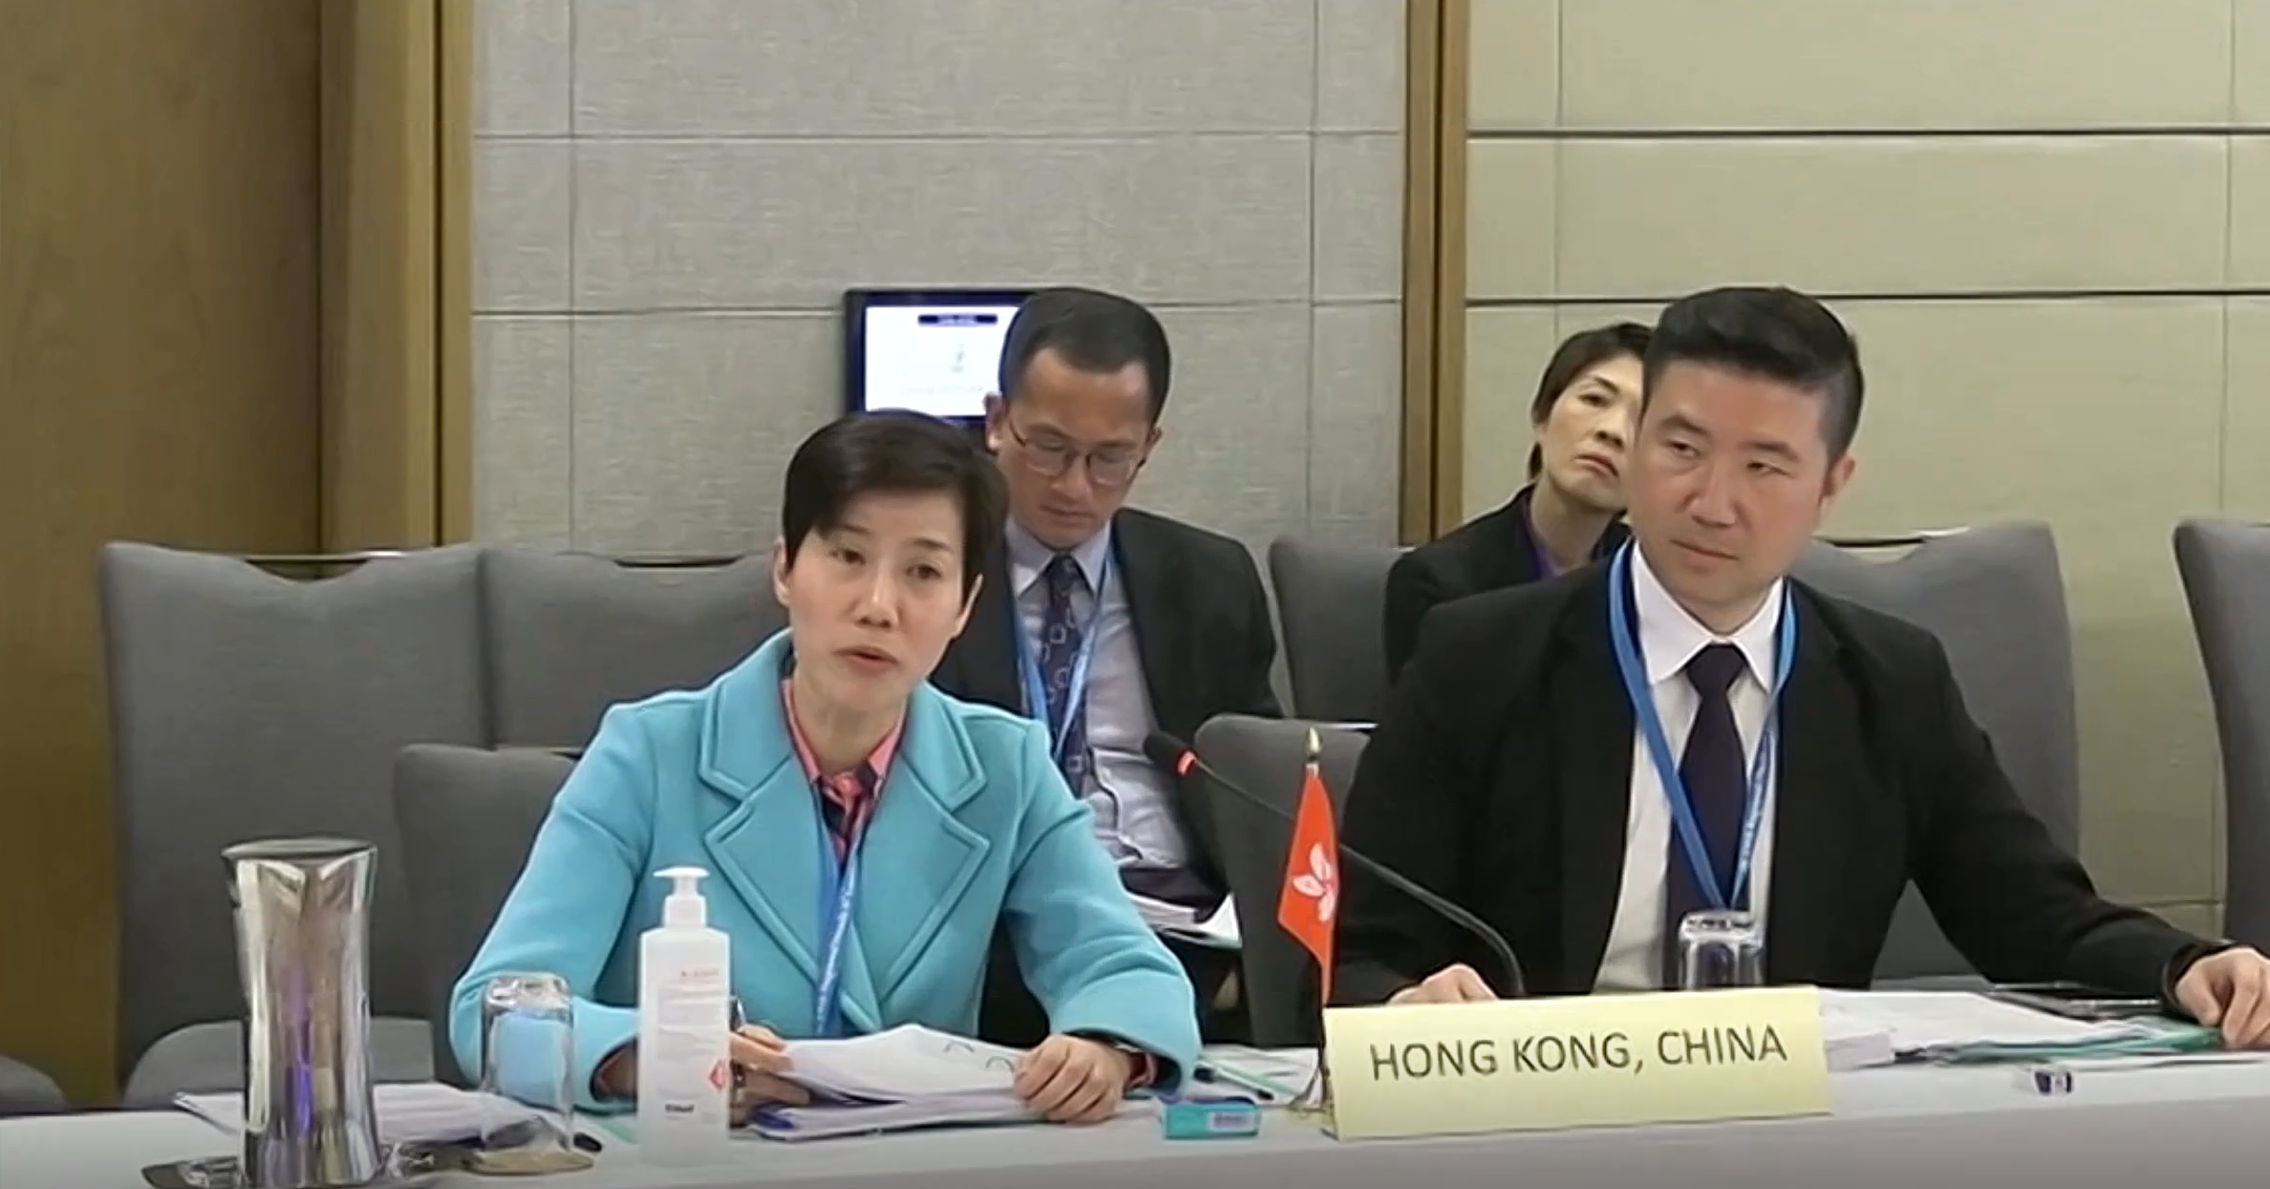 The Commissioner of Customs and Excise, Ms Louise Ho (left), from May 28 to 31, led a delegation to attend the 24th World Customs Organization Asia/Pacific Regional Heads of Customs Administrations Conference in Perth, Australia. Photo shows Ms Ho making a speech in the conference.